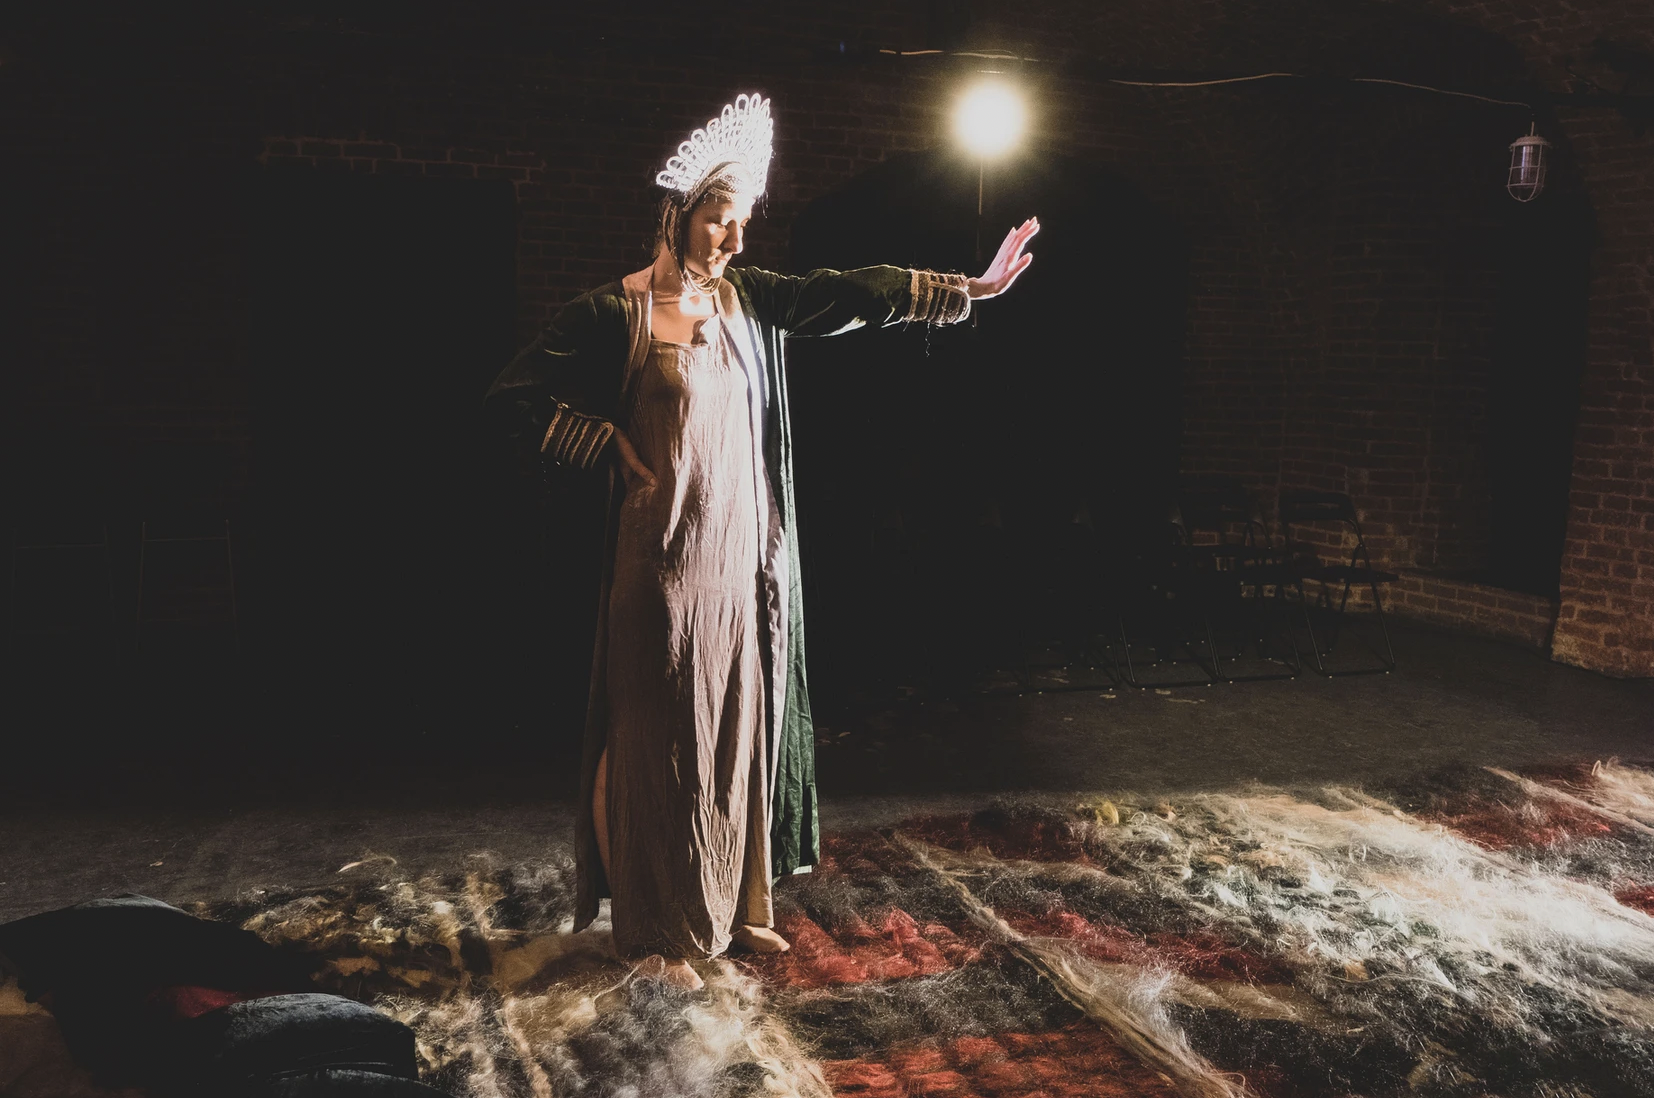 A woman wearing a lacey crown stands alone on a carpeted floor with a hand extended in a "halt" gesture.